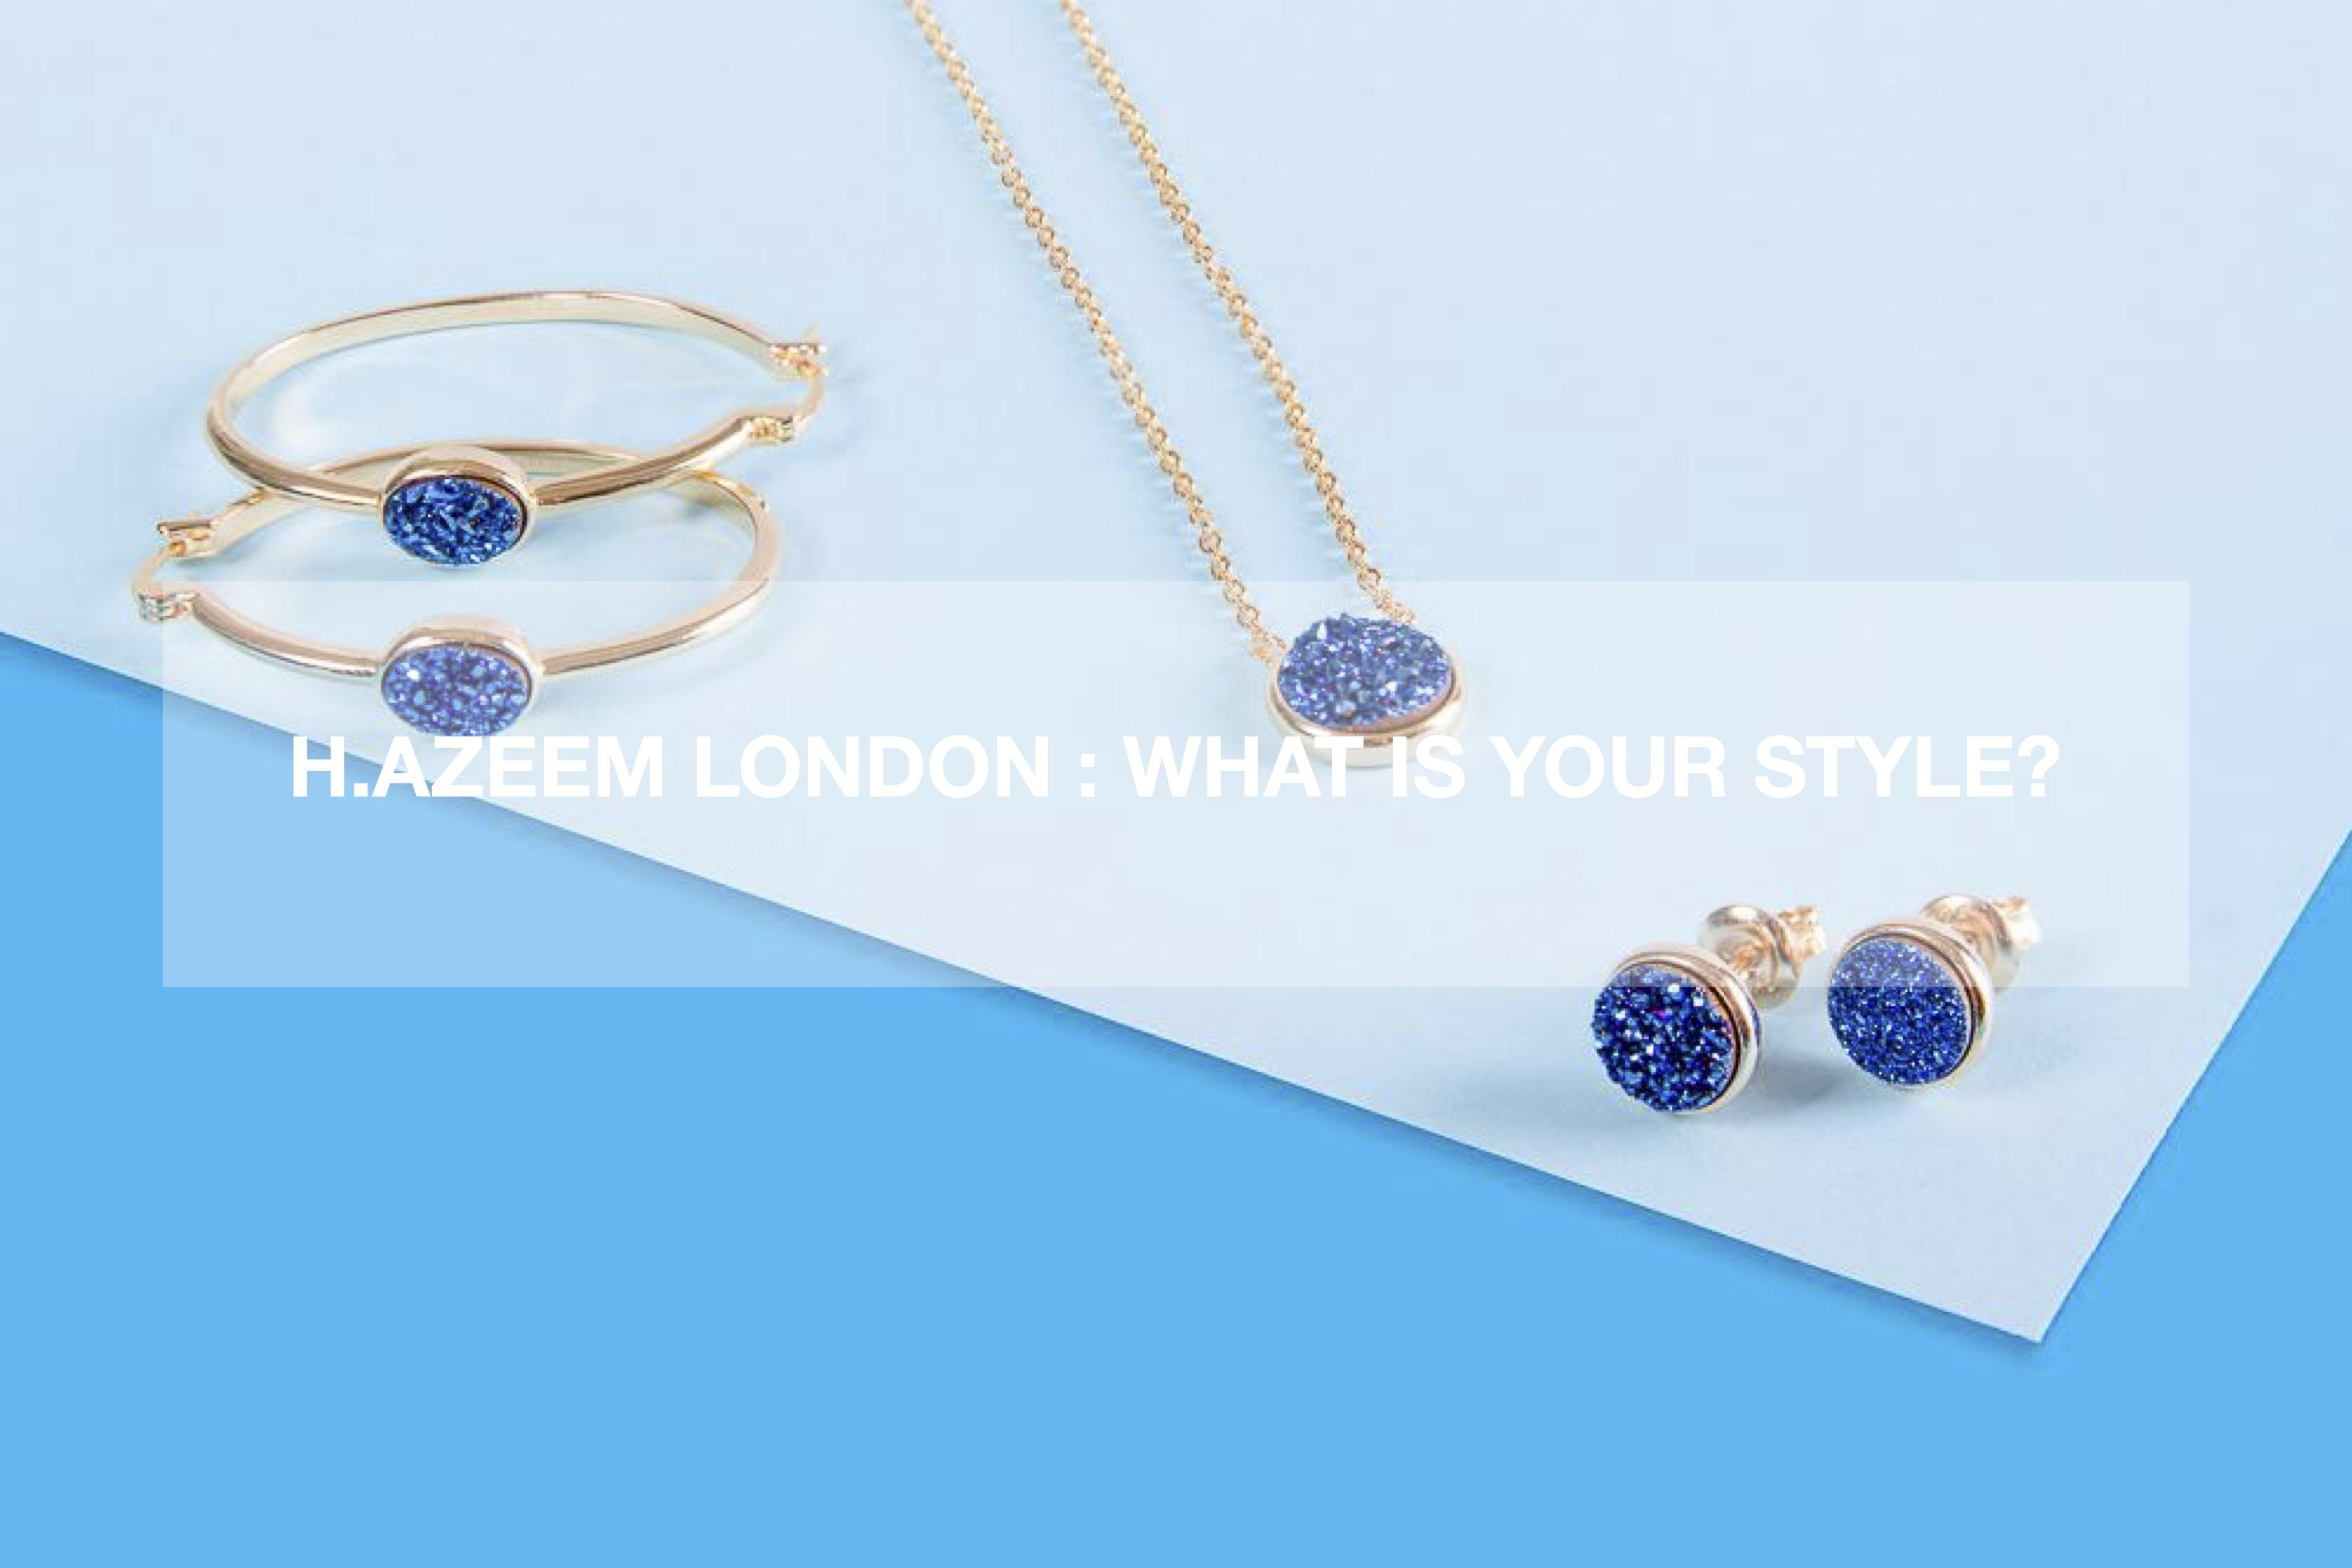 H.AZEEM London : What is Your Style?